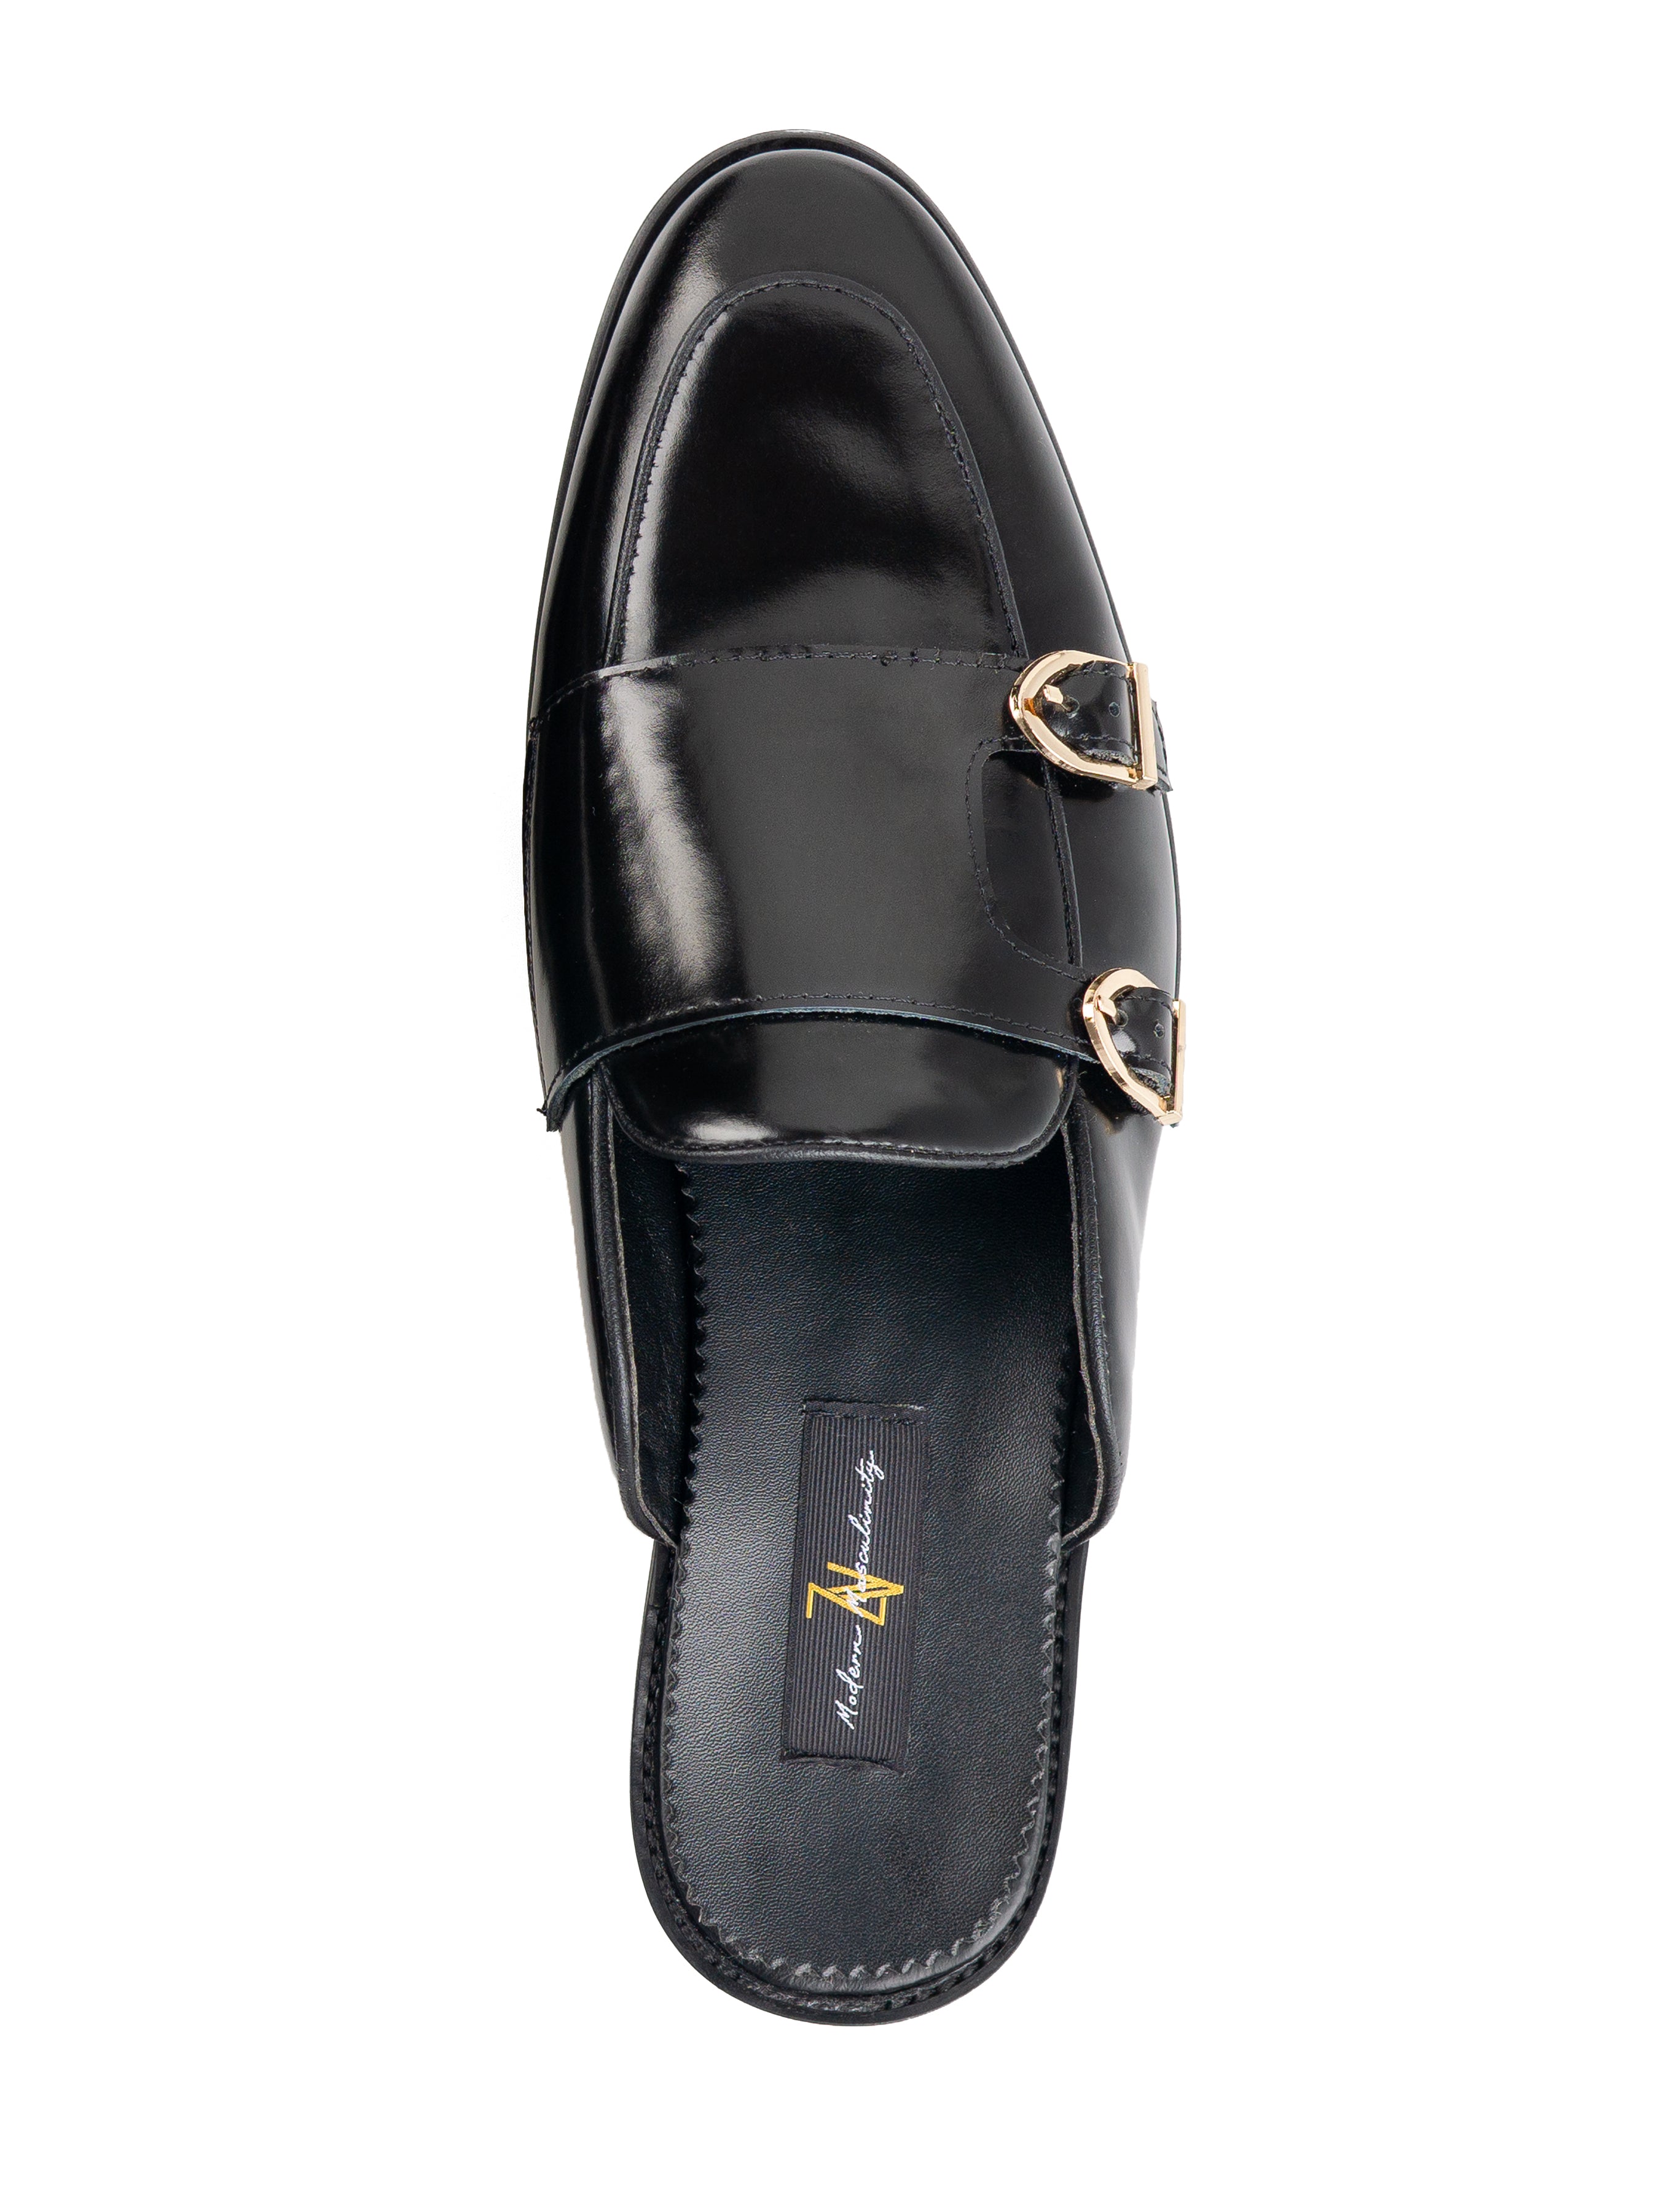 Mules Double Monk Strap - Black Patent Leather